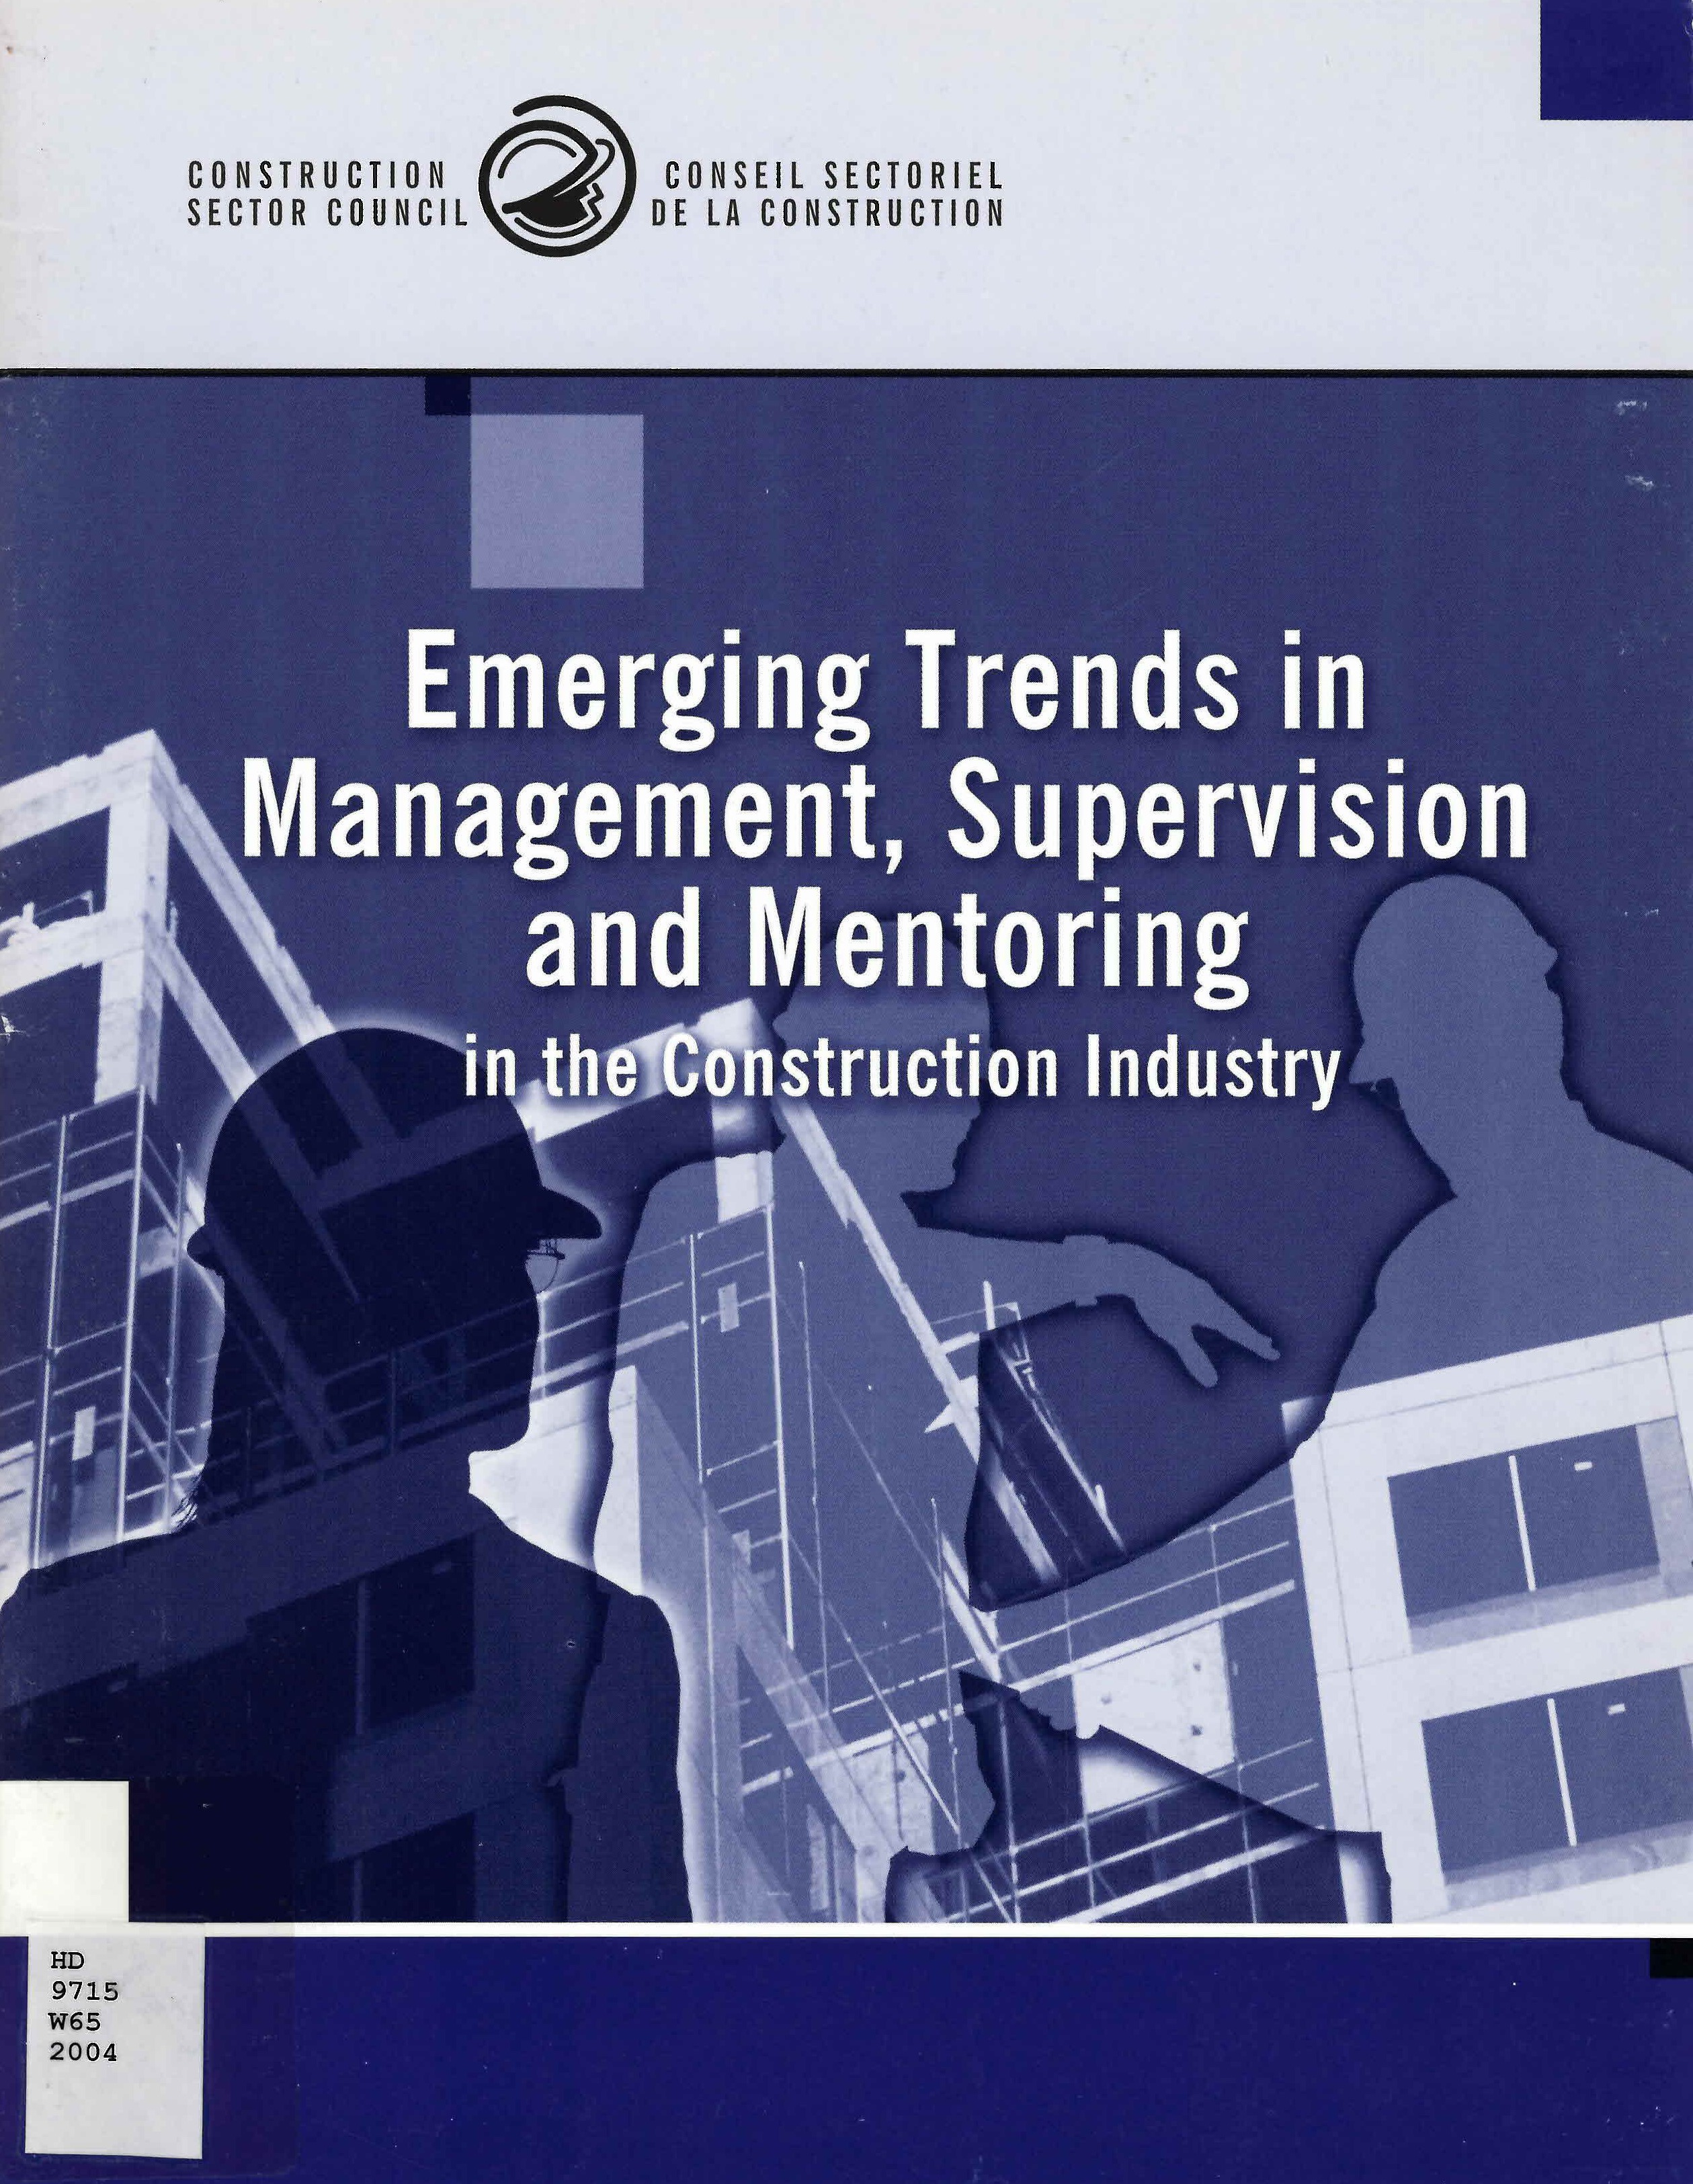 Emerging trends in management, supervision and mentoring in the construction industry